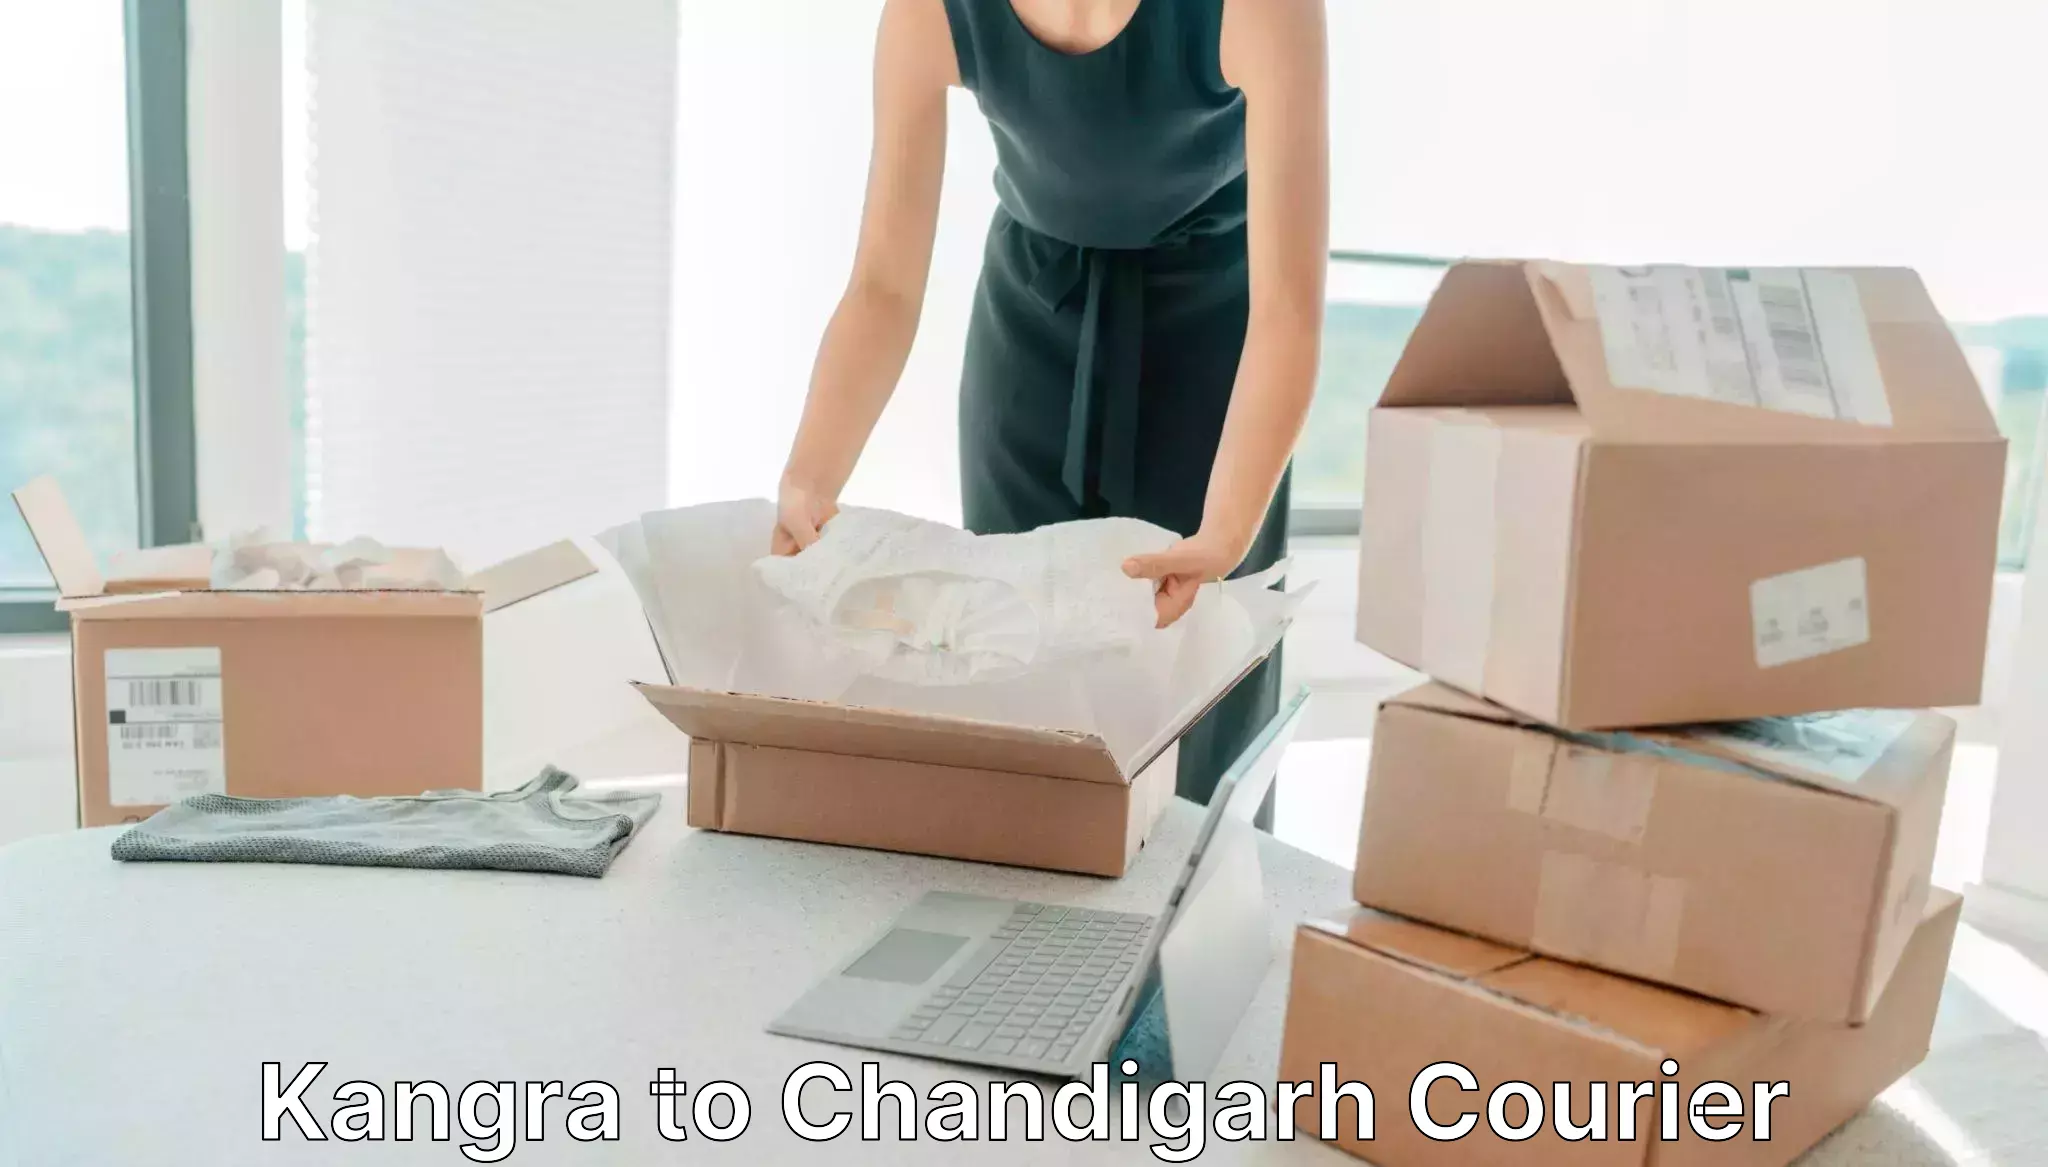 Affordable parcel service Kangra to Chandigarh